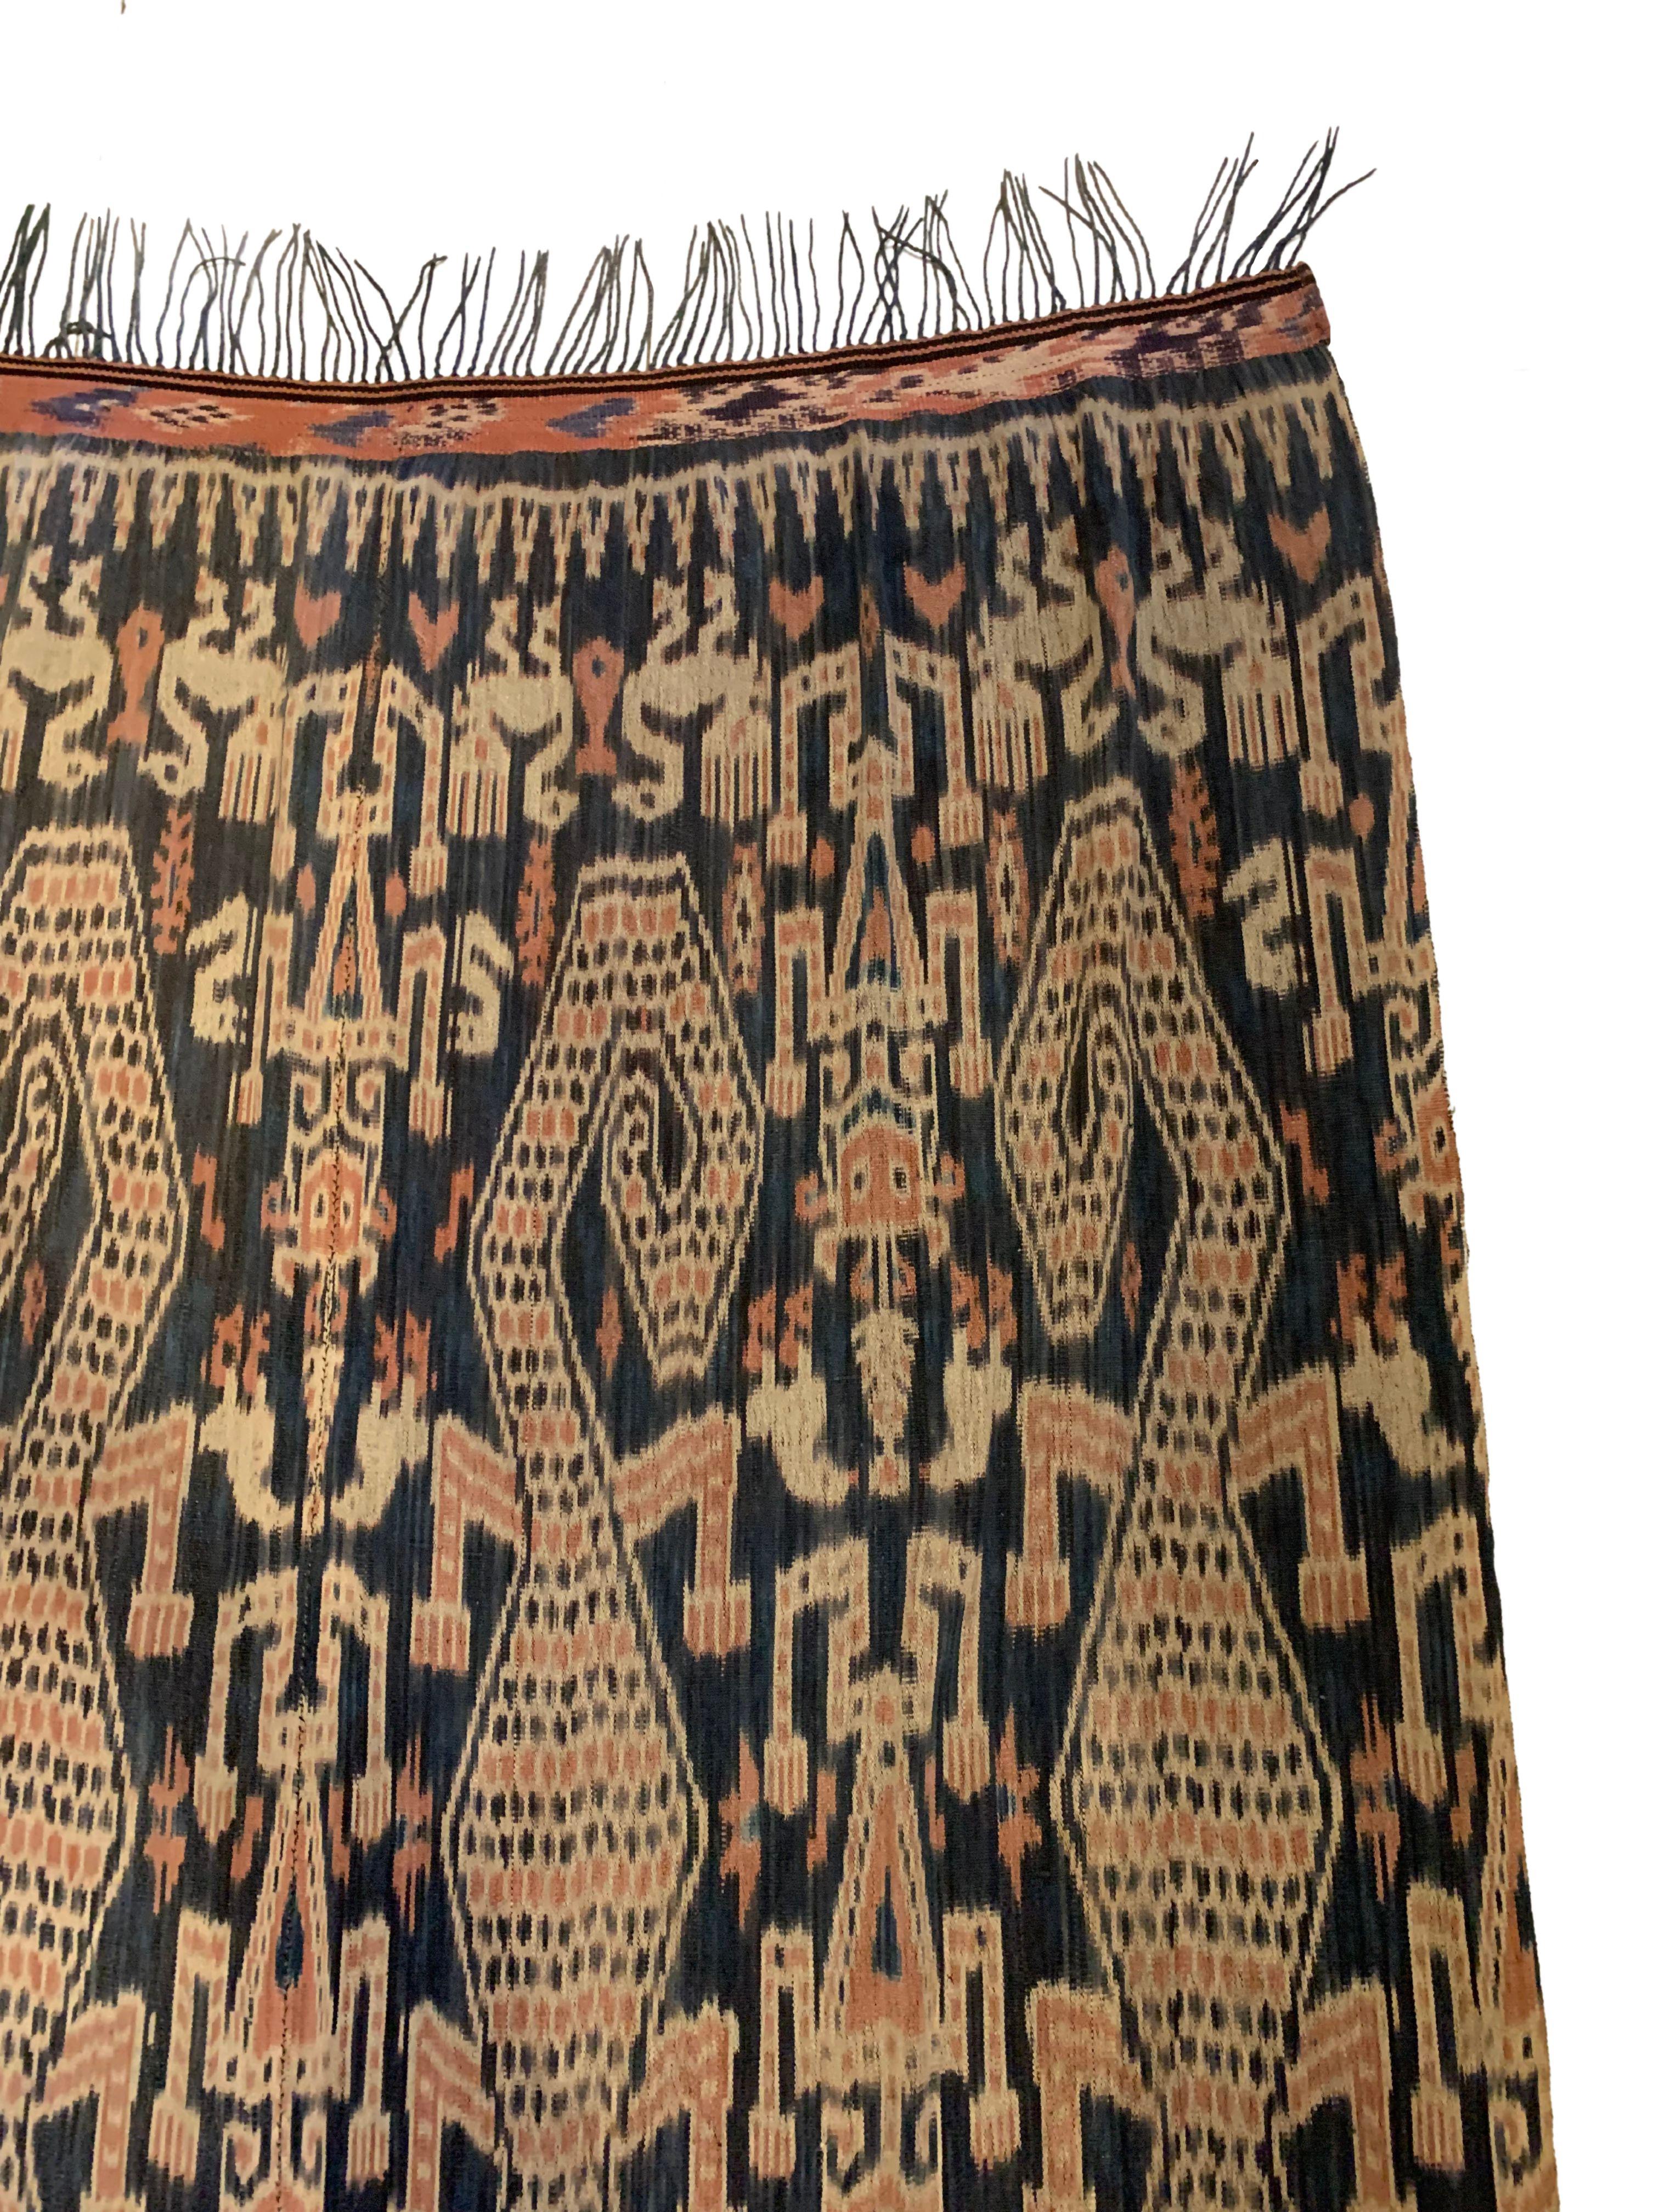 Indonesian Ikat Textile from Sumba Island Tribal Motifs, Indonesia For Sale